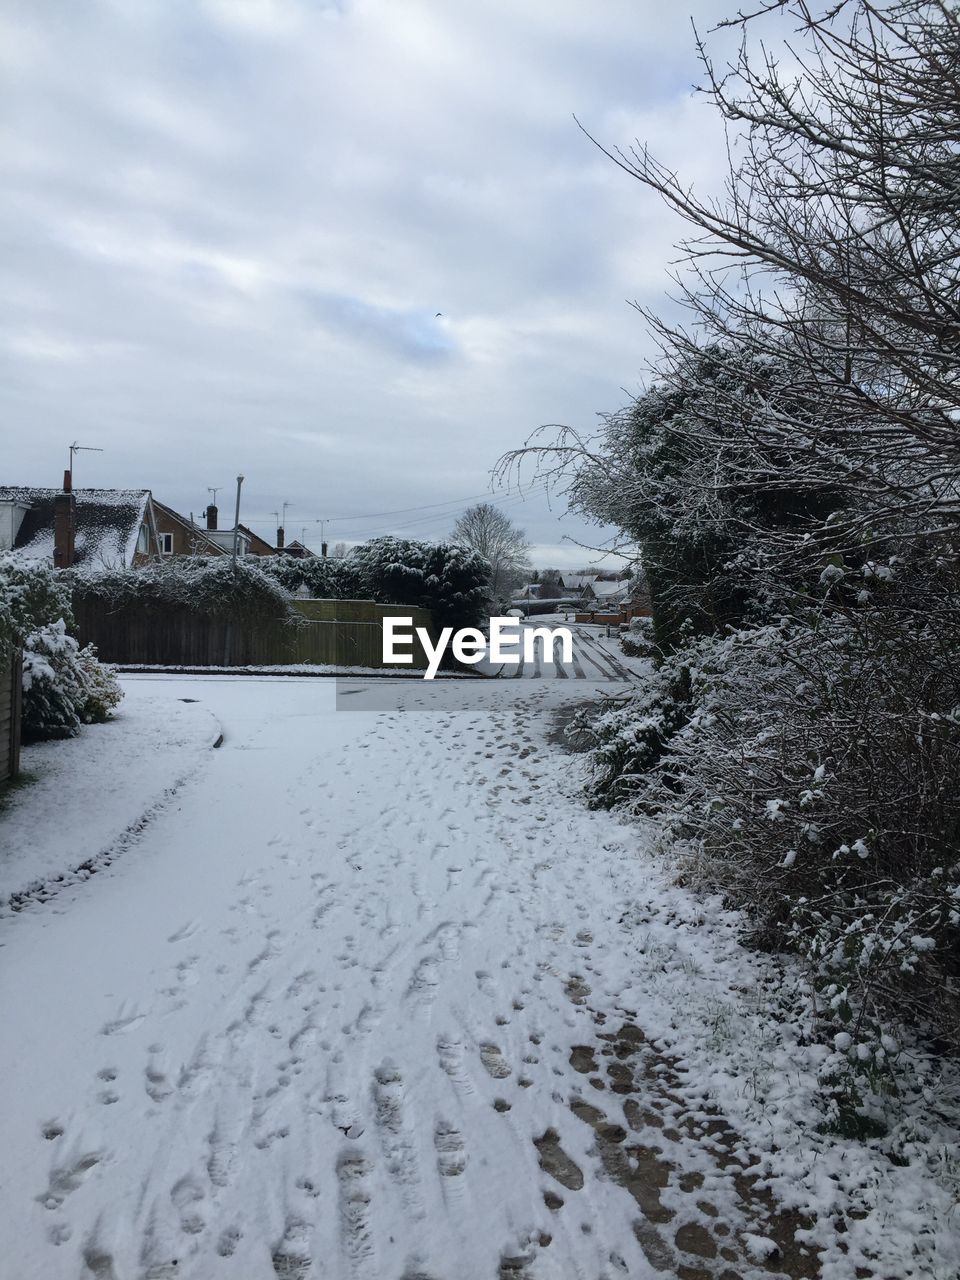 SCENIC VIEW OF SNOW AGAINST SKY